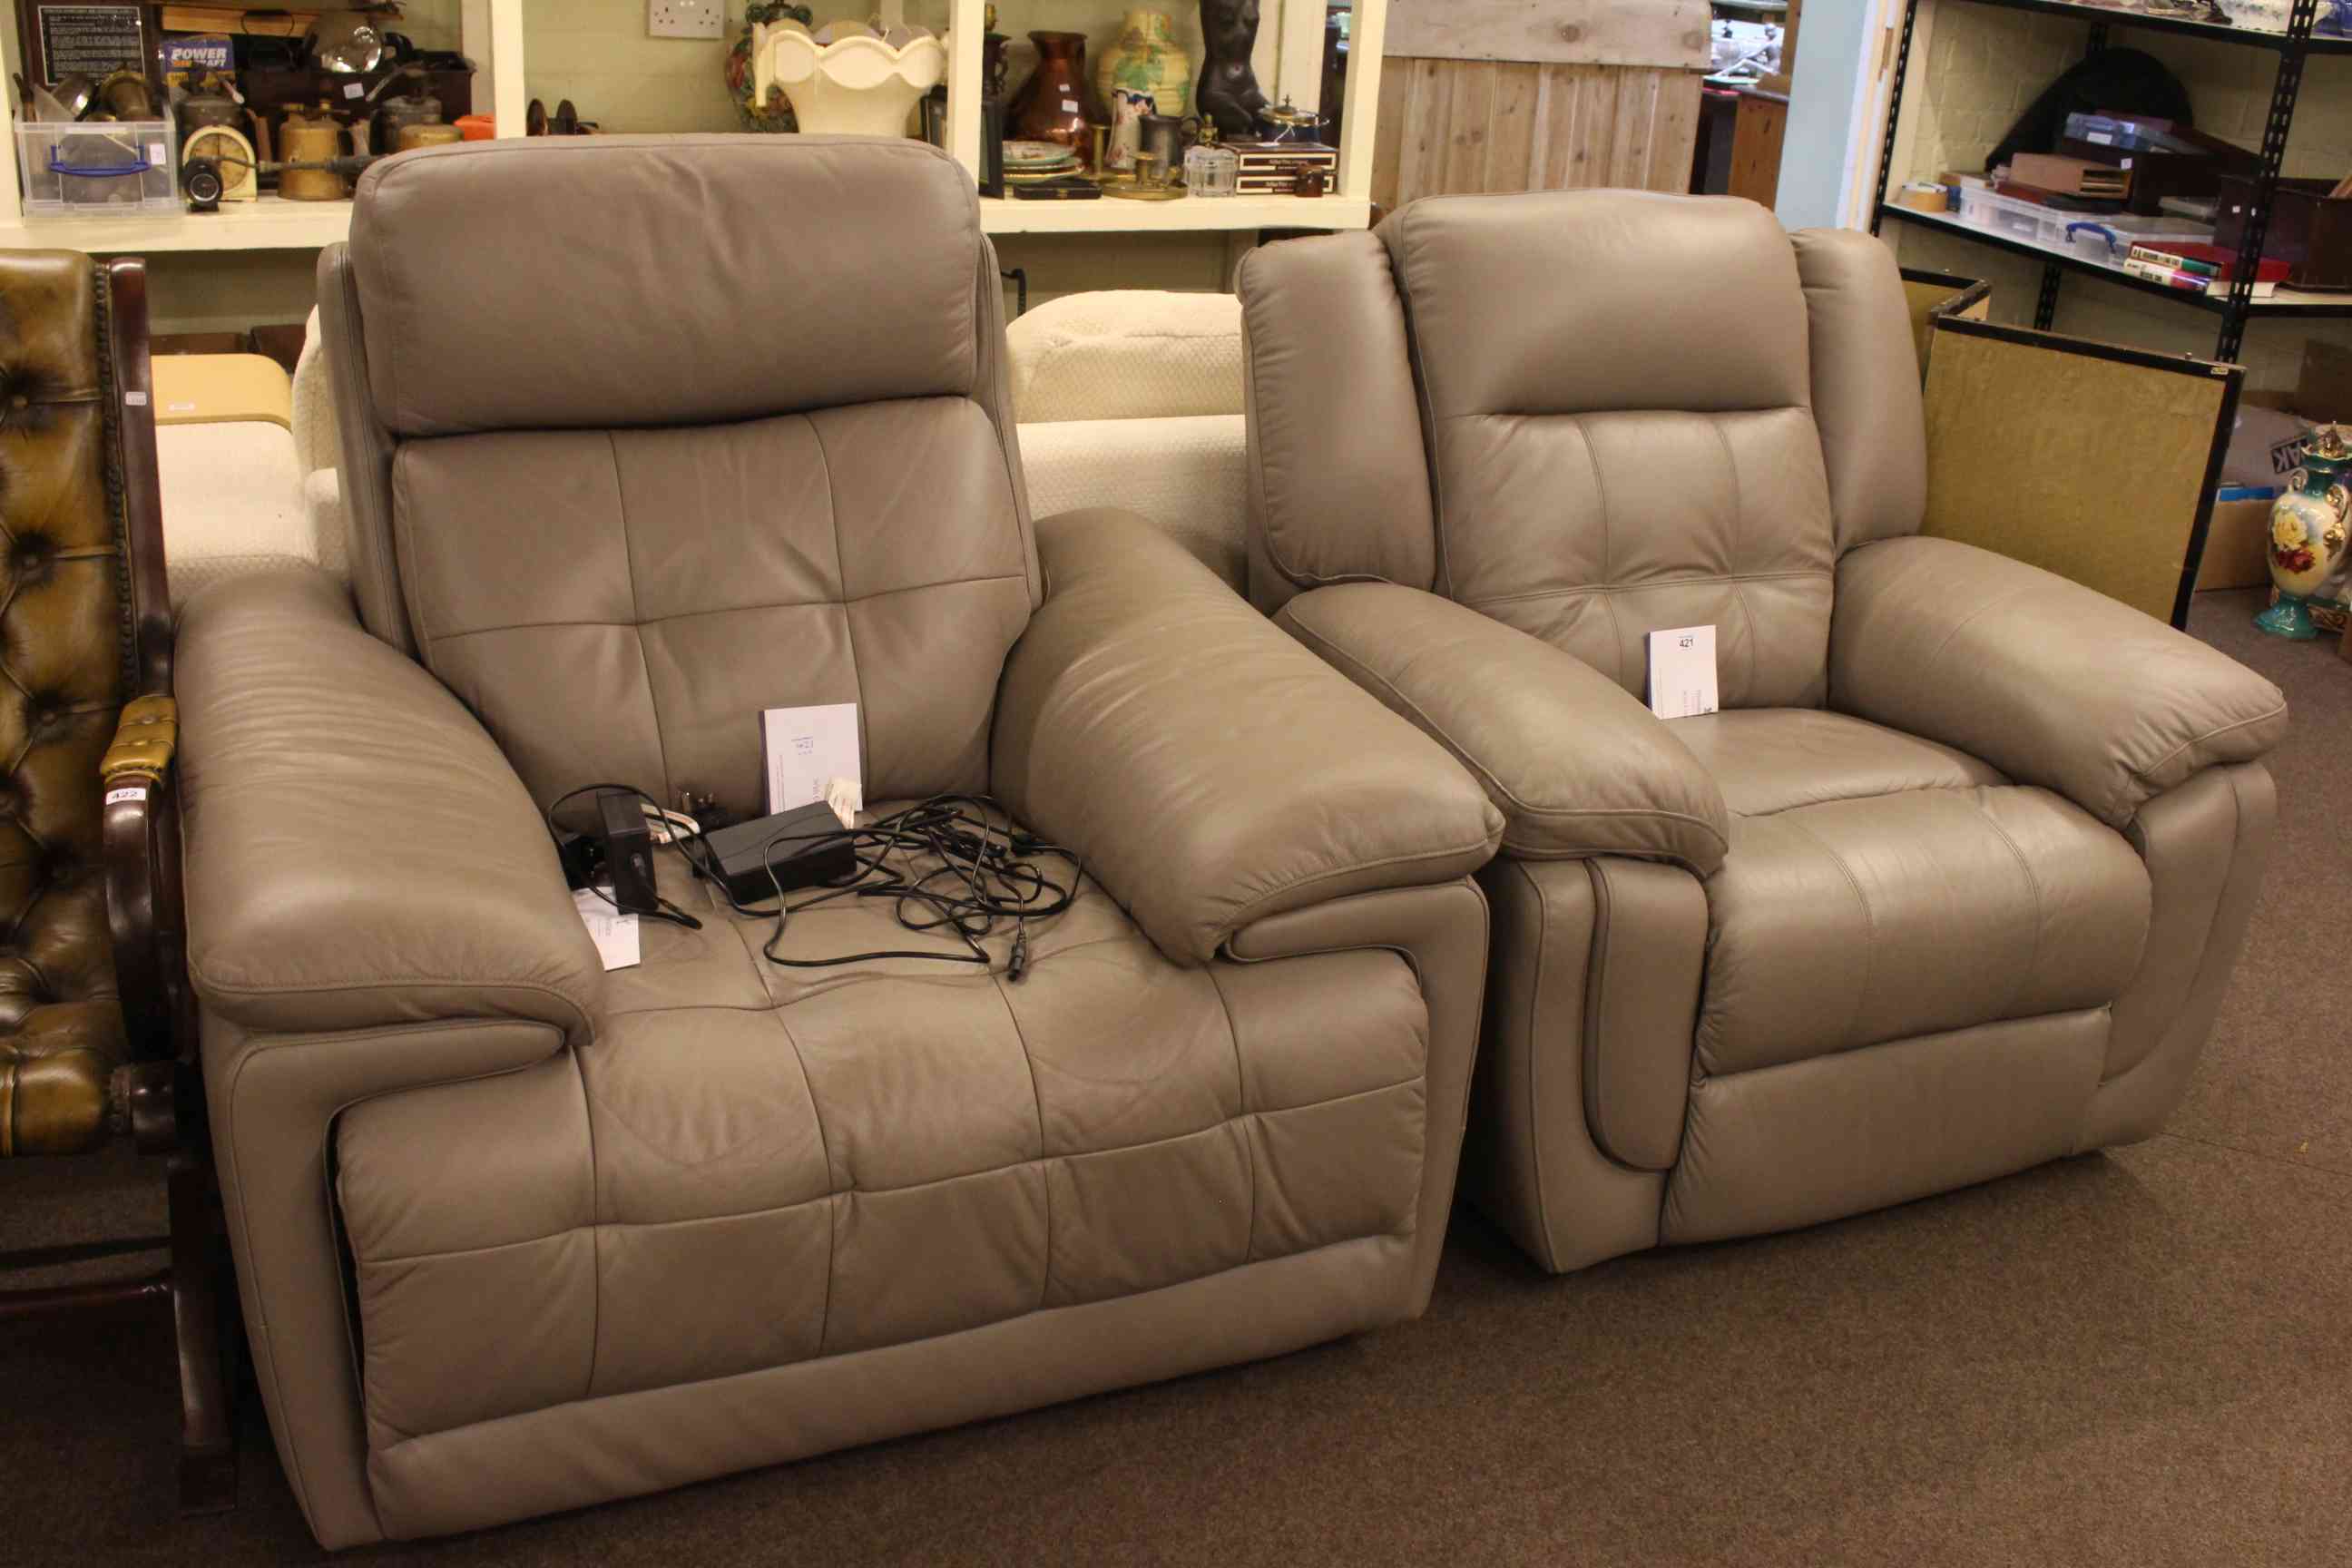 Pair of grey leather La-z-boy electric reclining armchairs, one of which also rocks and swivels.